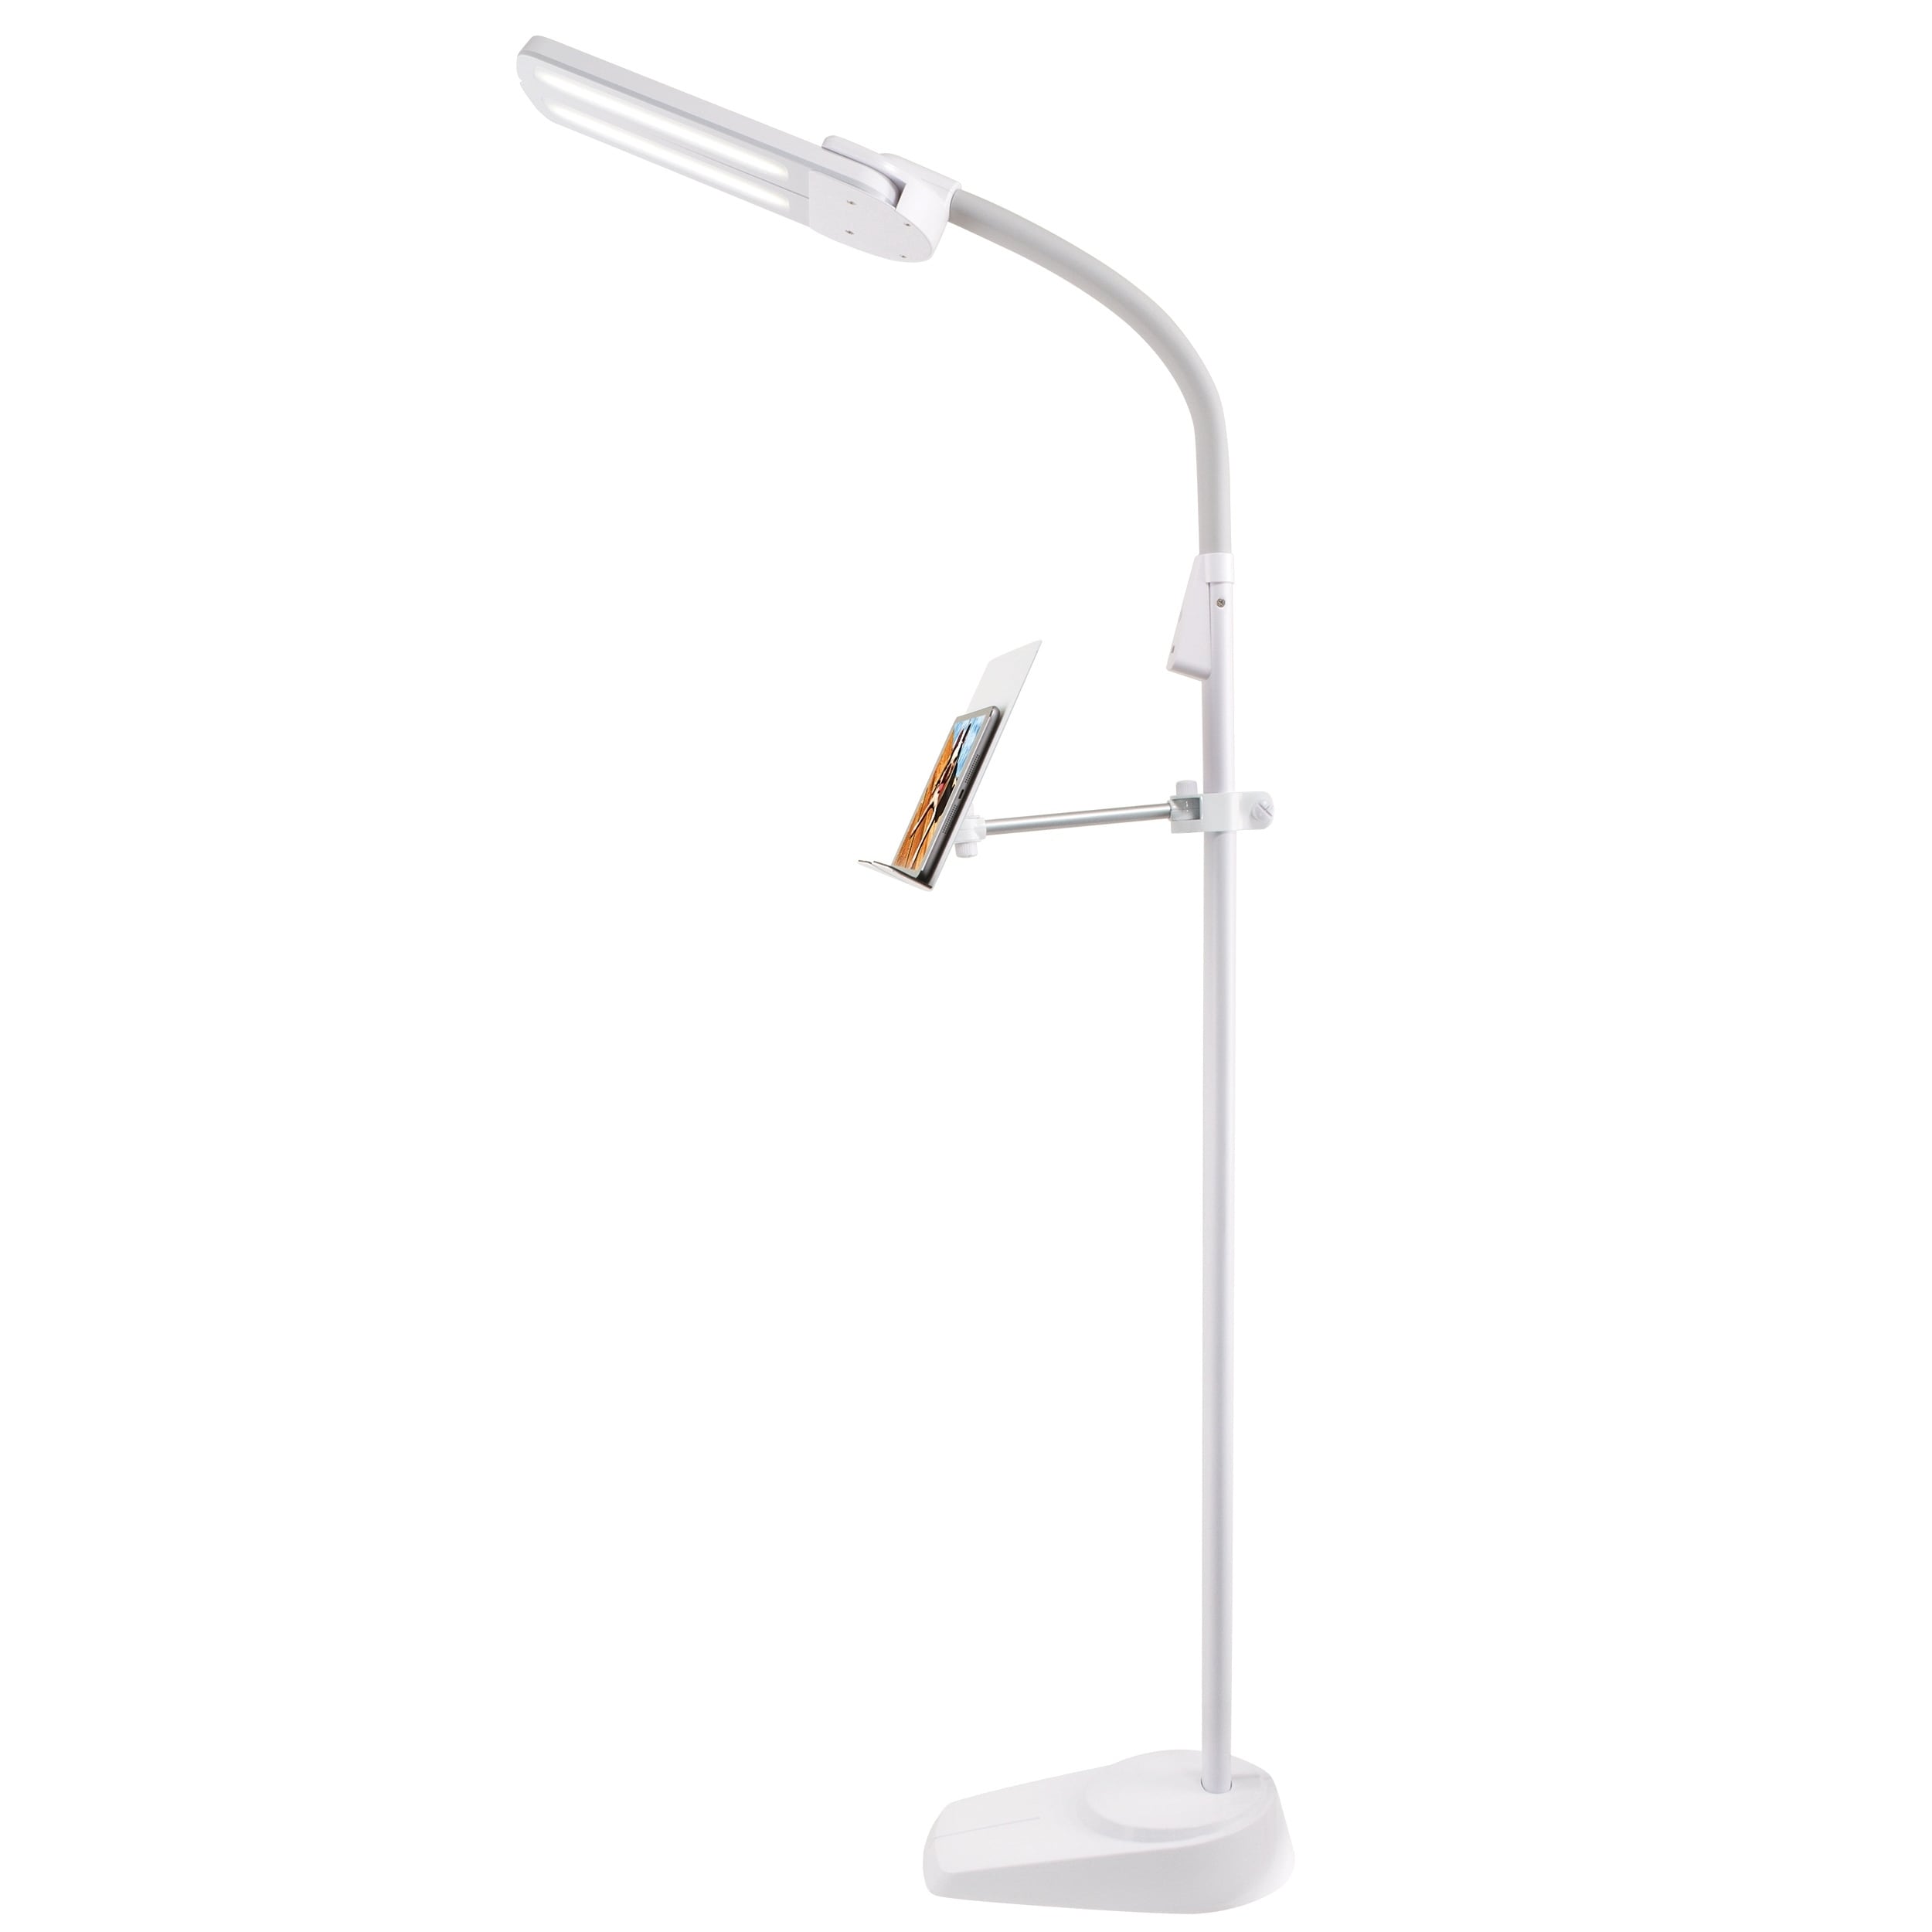 OttLite Dual Shade LED Floor Lamp with USB Charging Station Bed Bath   Beyond 30757184